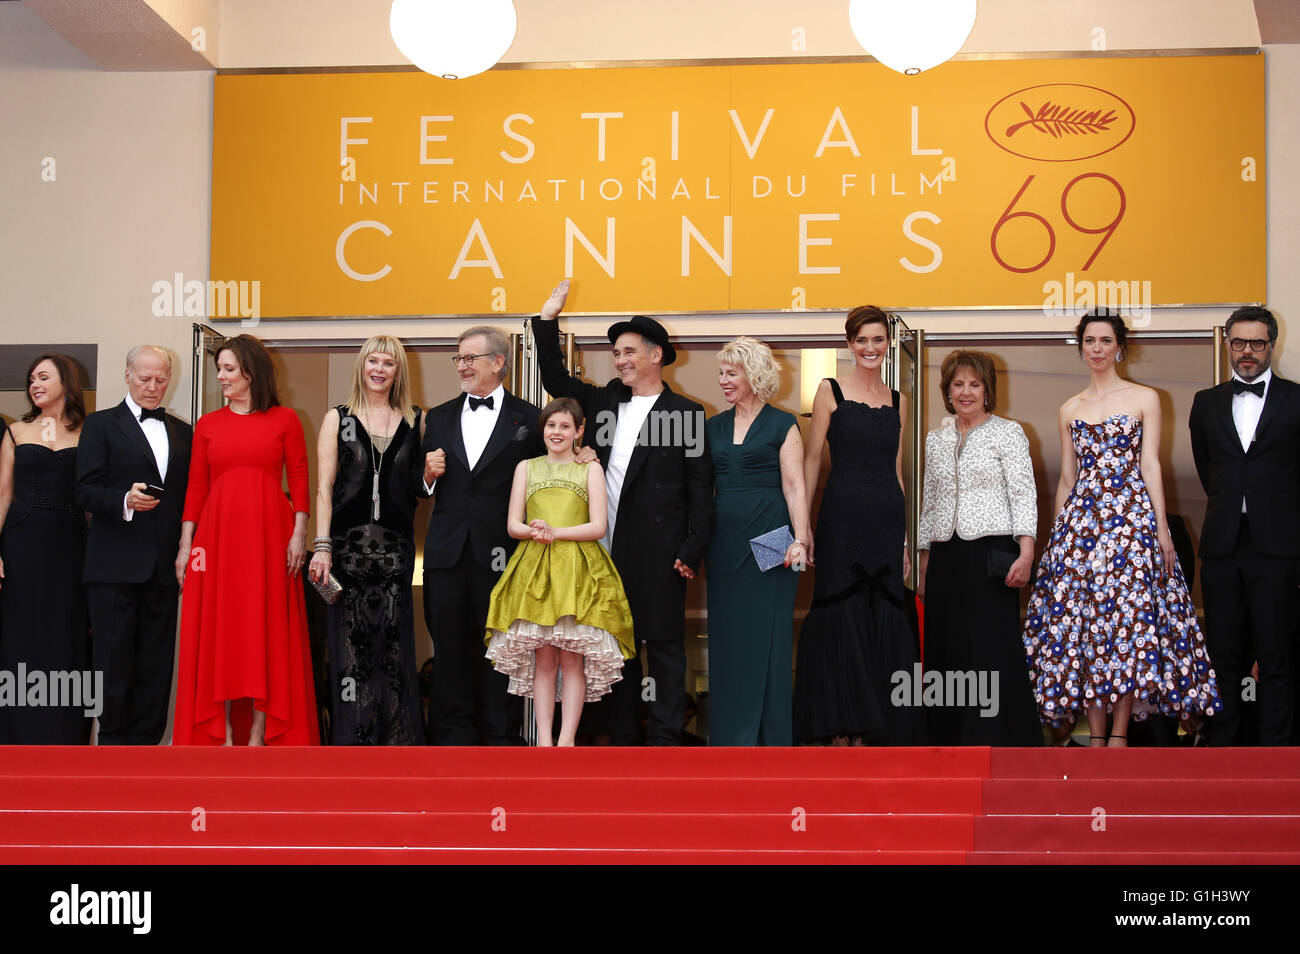 Kristie Macosko, Frank Marshall, Kathleen Kennedy, Kate Capshaw, Steven Spielberg, Ruby Barnhill, Mark Rylance, Claire van Kampen, Lucy Dahl, Penelope Wilton, Rebecca Hall and Jemaine Clement attending the 'The BFG' premiere during the 69th Cannes Film Festival at the Palais des Festivals in Cannes on May 14, 2016 | usage worldwide Stock Photo